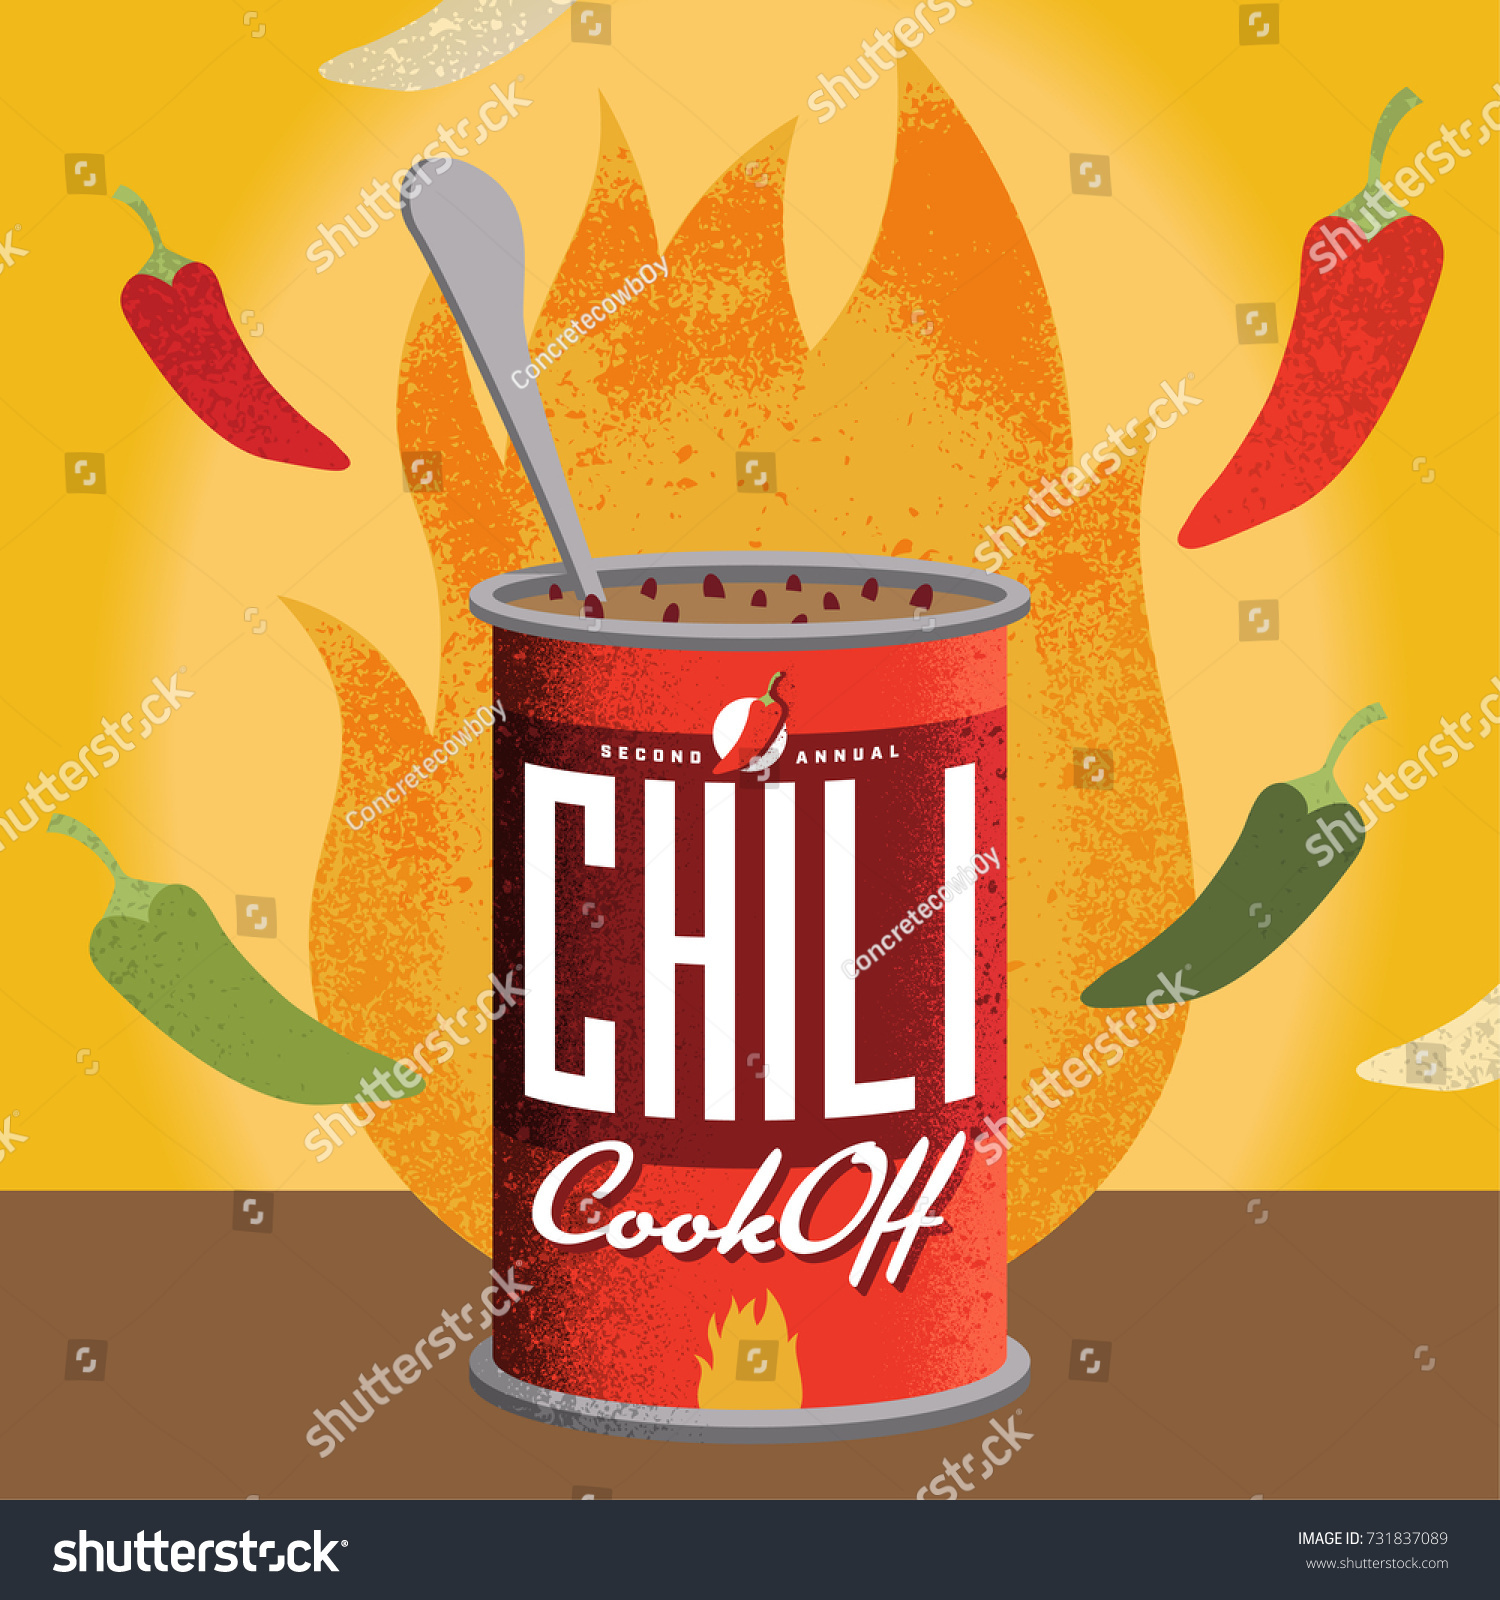 Fully editable vector illustration for a chili cook-off. Perfect for your private event or a corporate setting. Edit text to suit.  #731837089